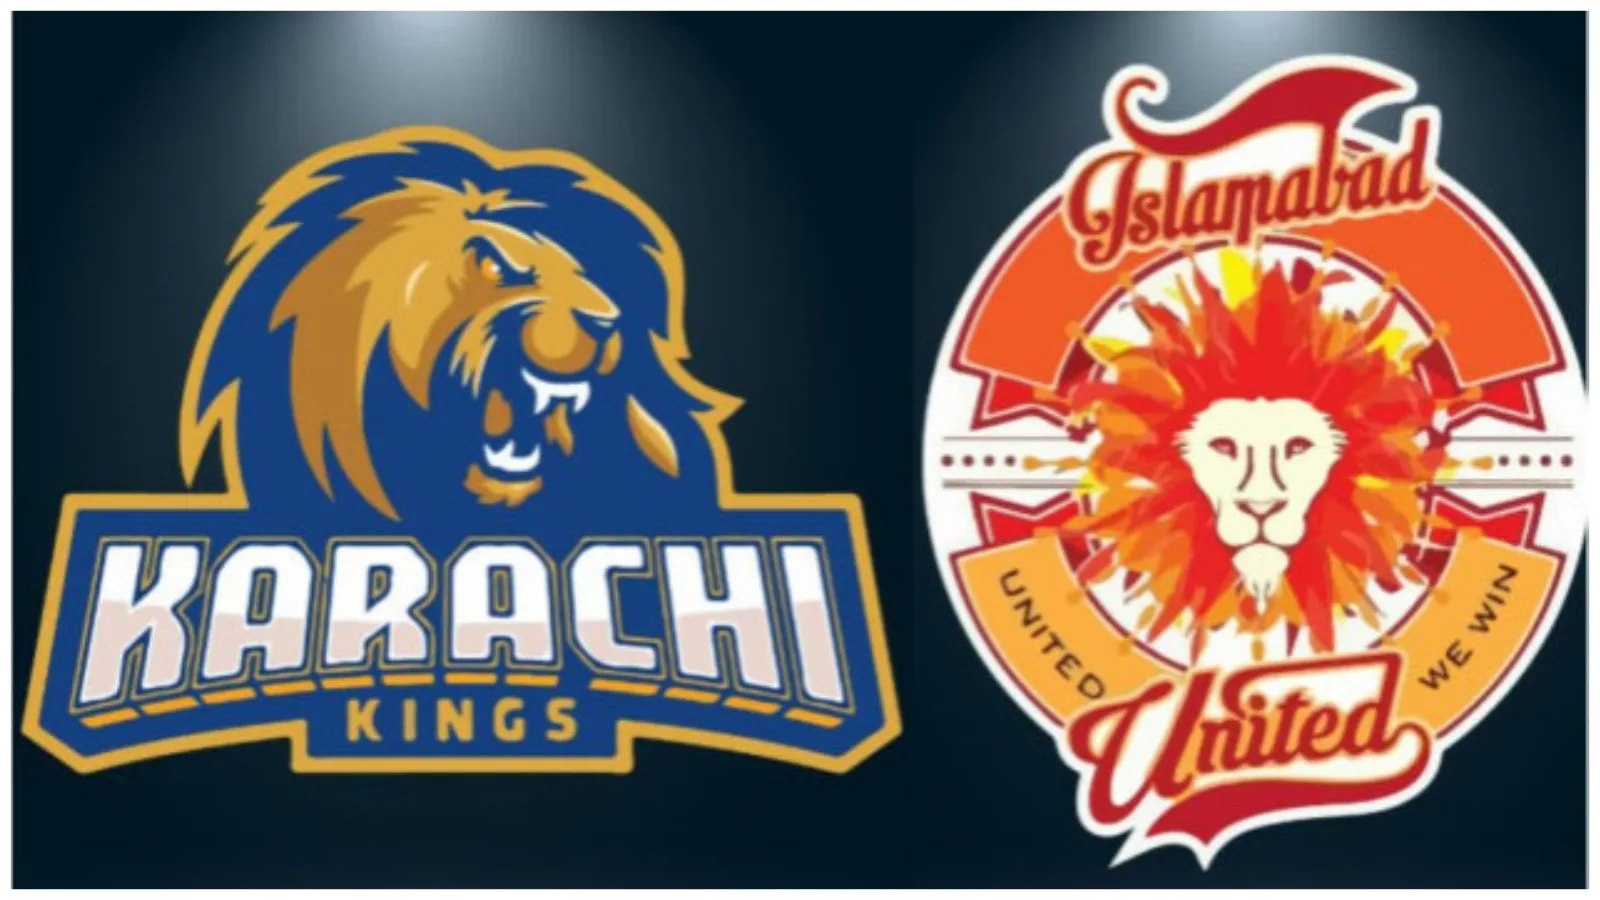 ISL vs KAR Dream11 Prediction, Player Stats, Head to Head, Pitch Report, Captain & Vice-captain, Live Streaming Details and More – PSL